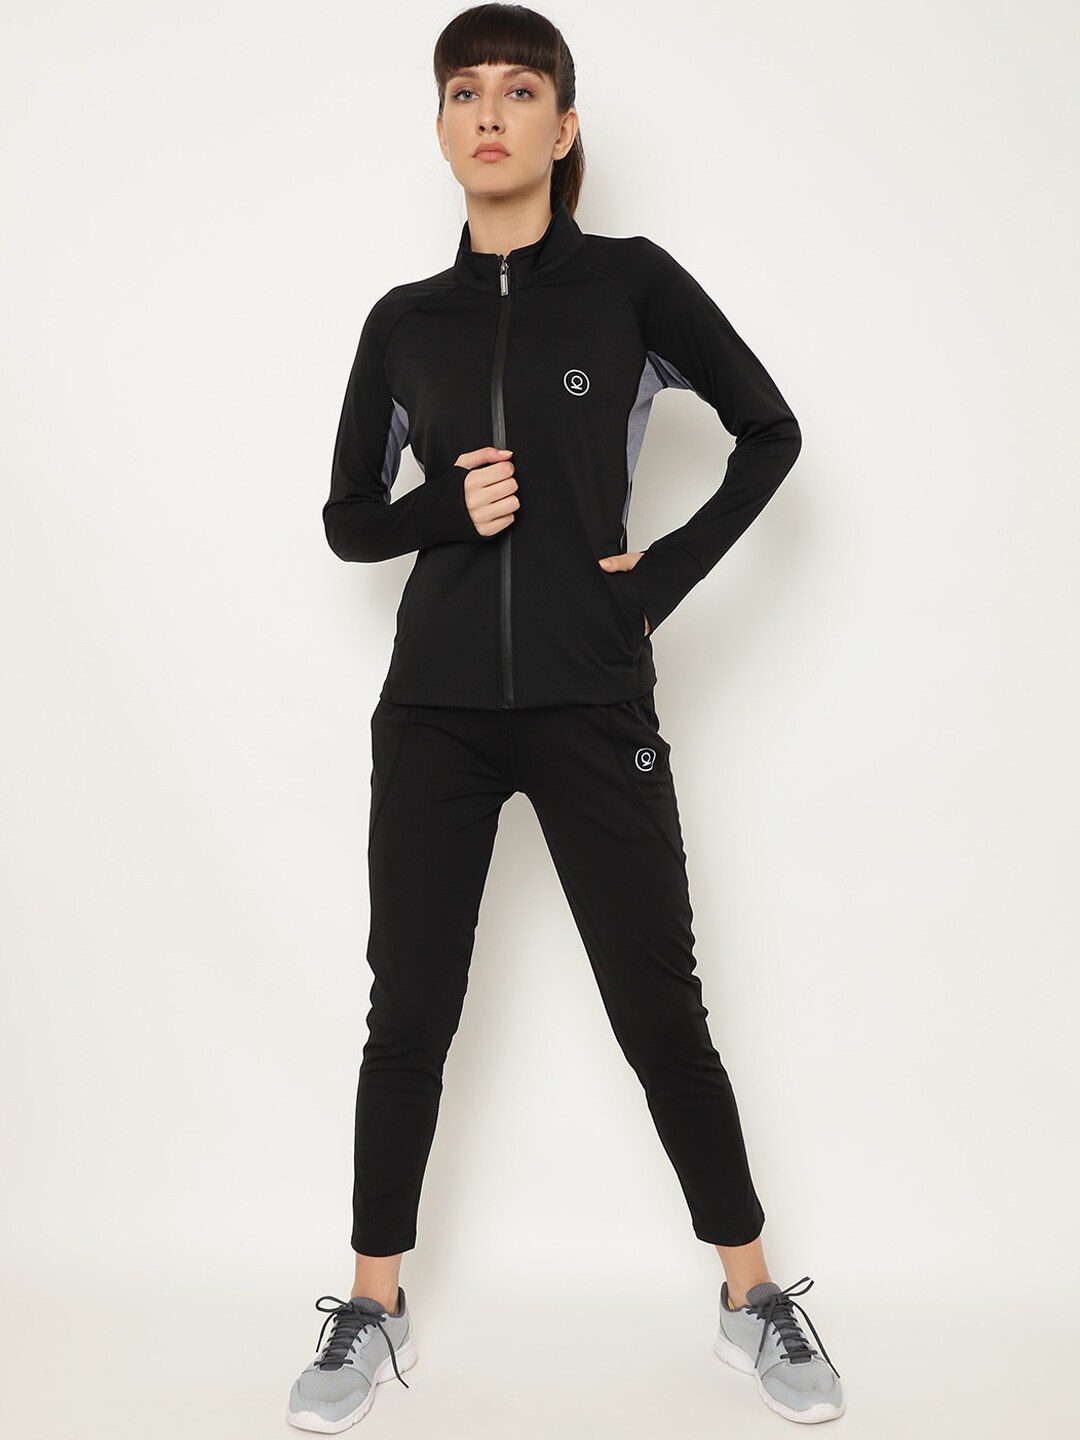 Chkokko Women Black Solid Sports Tracksuit Price in India